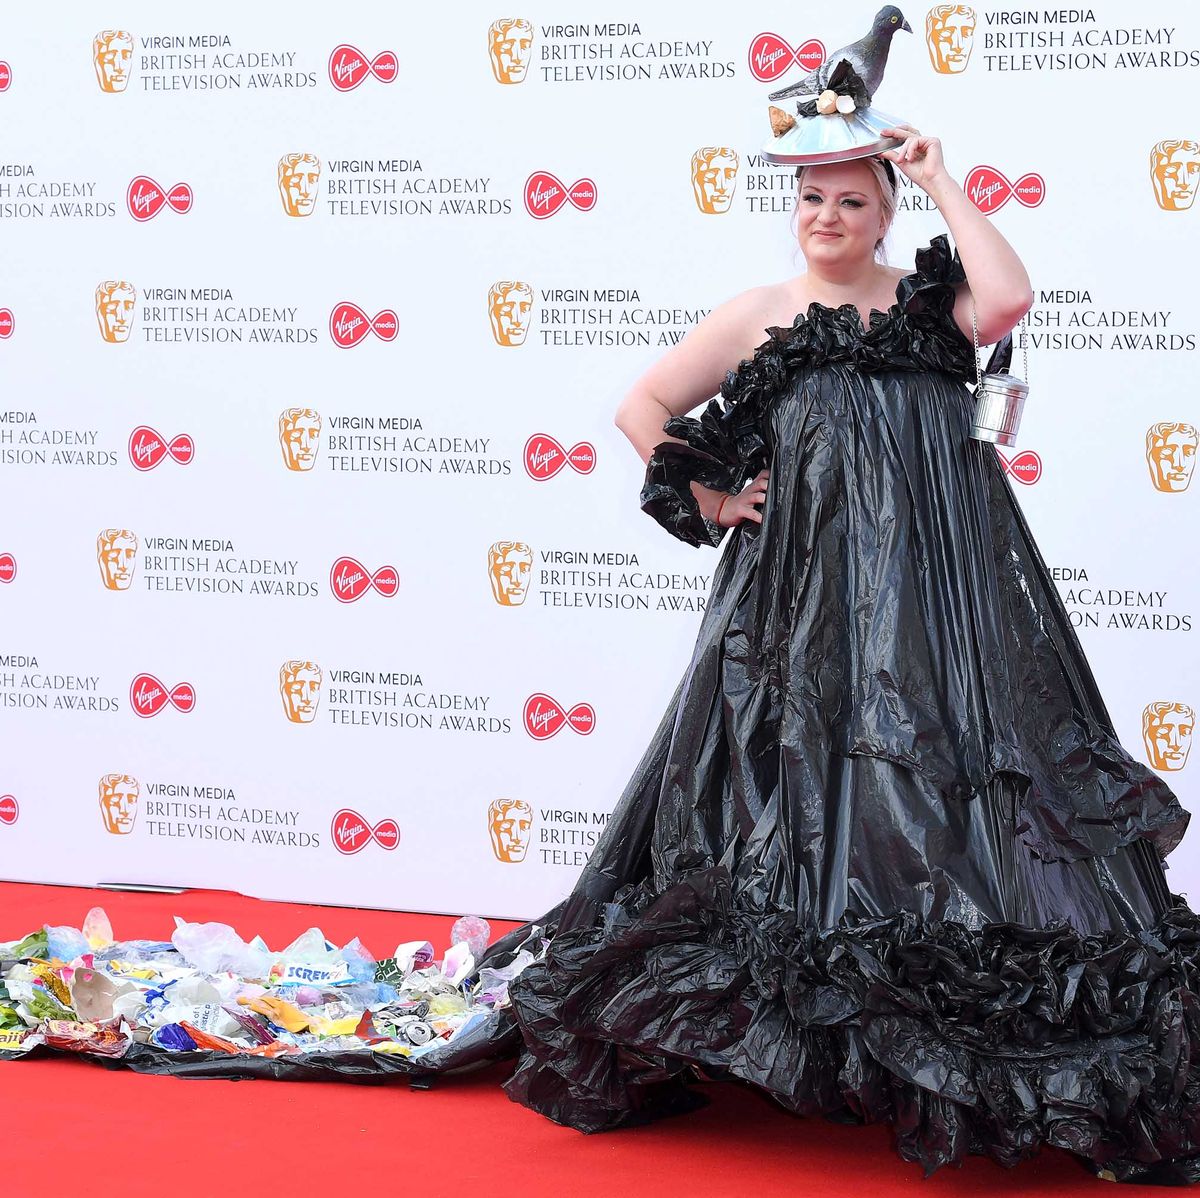 An actress wearing a dress made out of garbage bags, Academy Awards red  carpet photo : r/dalle2